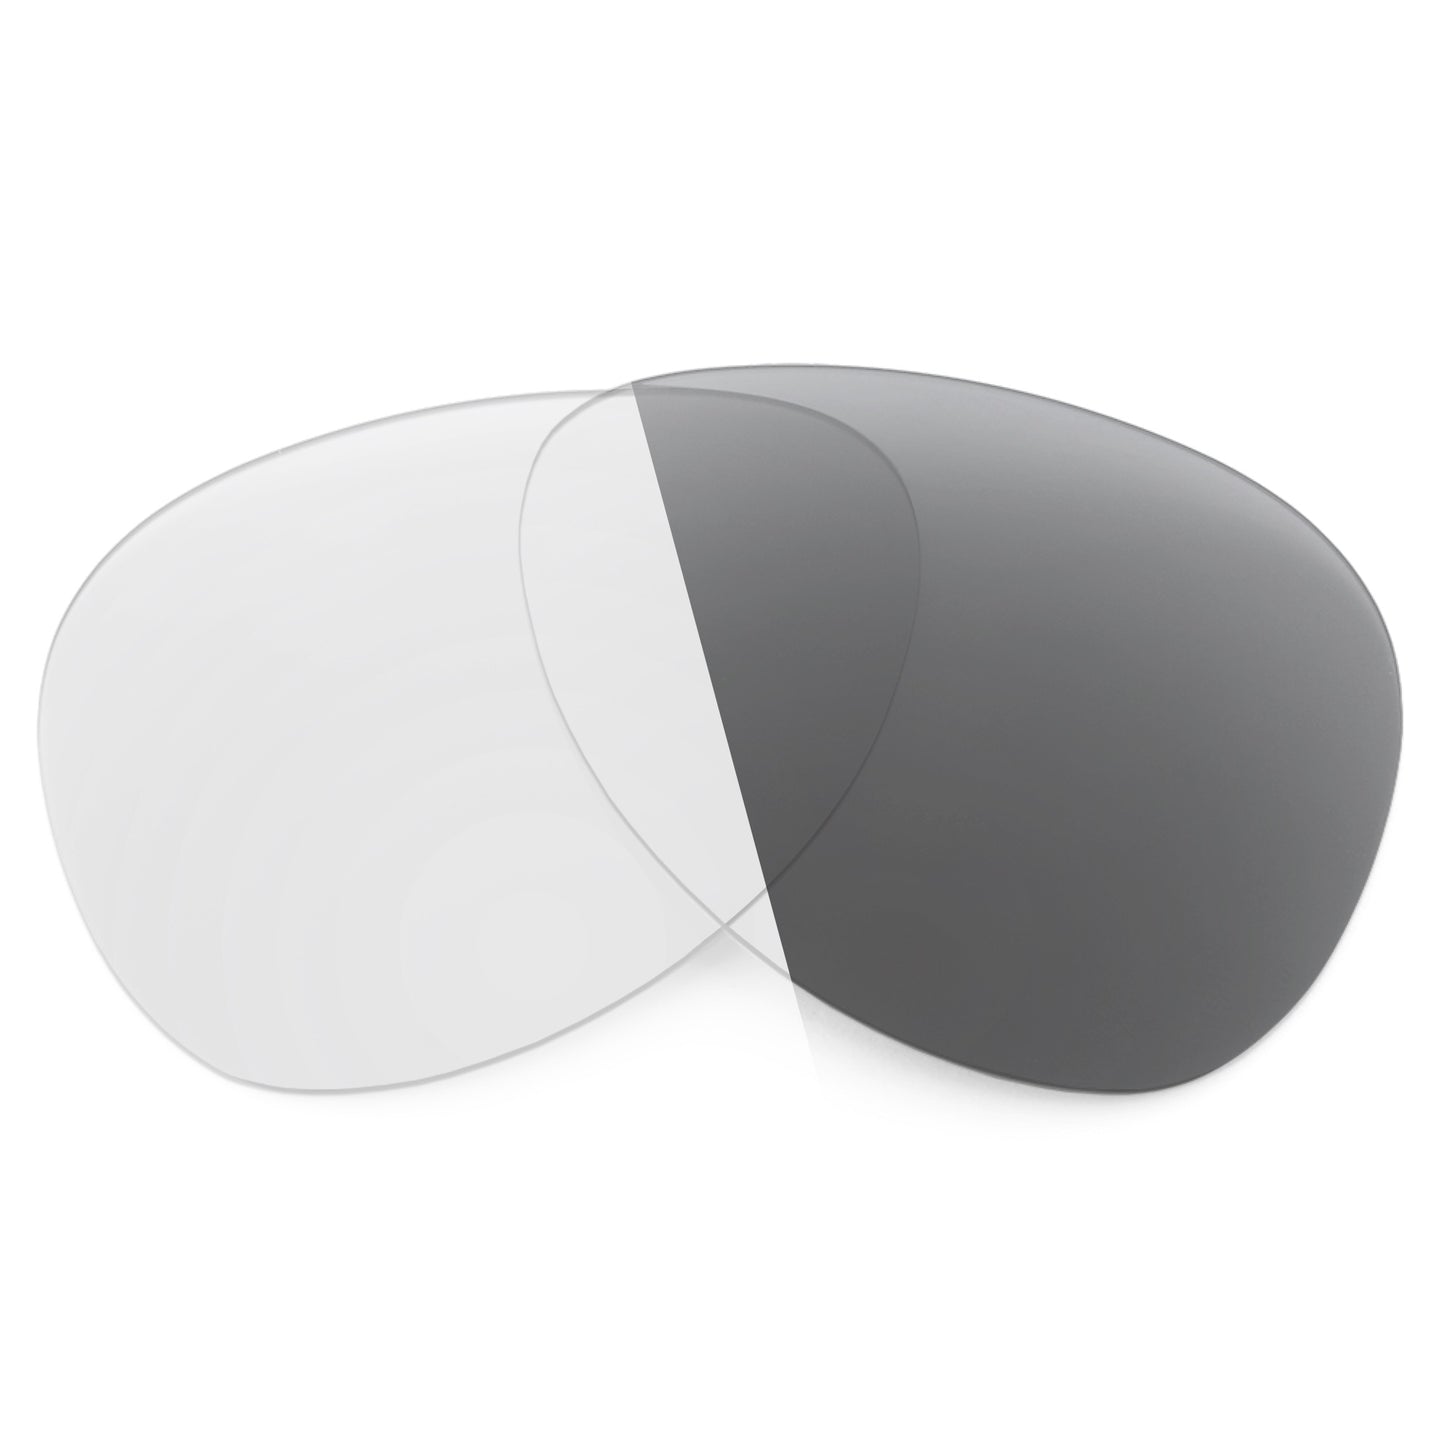 Revant replacement lenses for Ray-Ban RB4376 57mm Non-Polarized Adapt Gray Photochromic